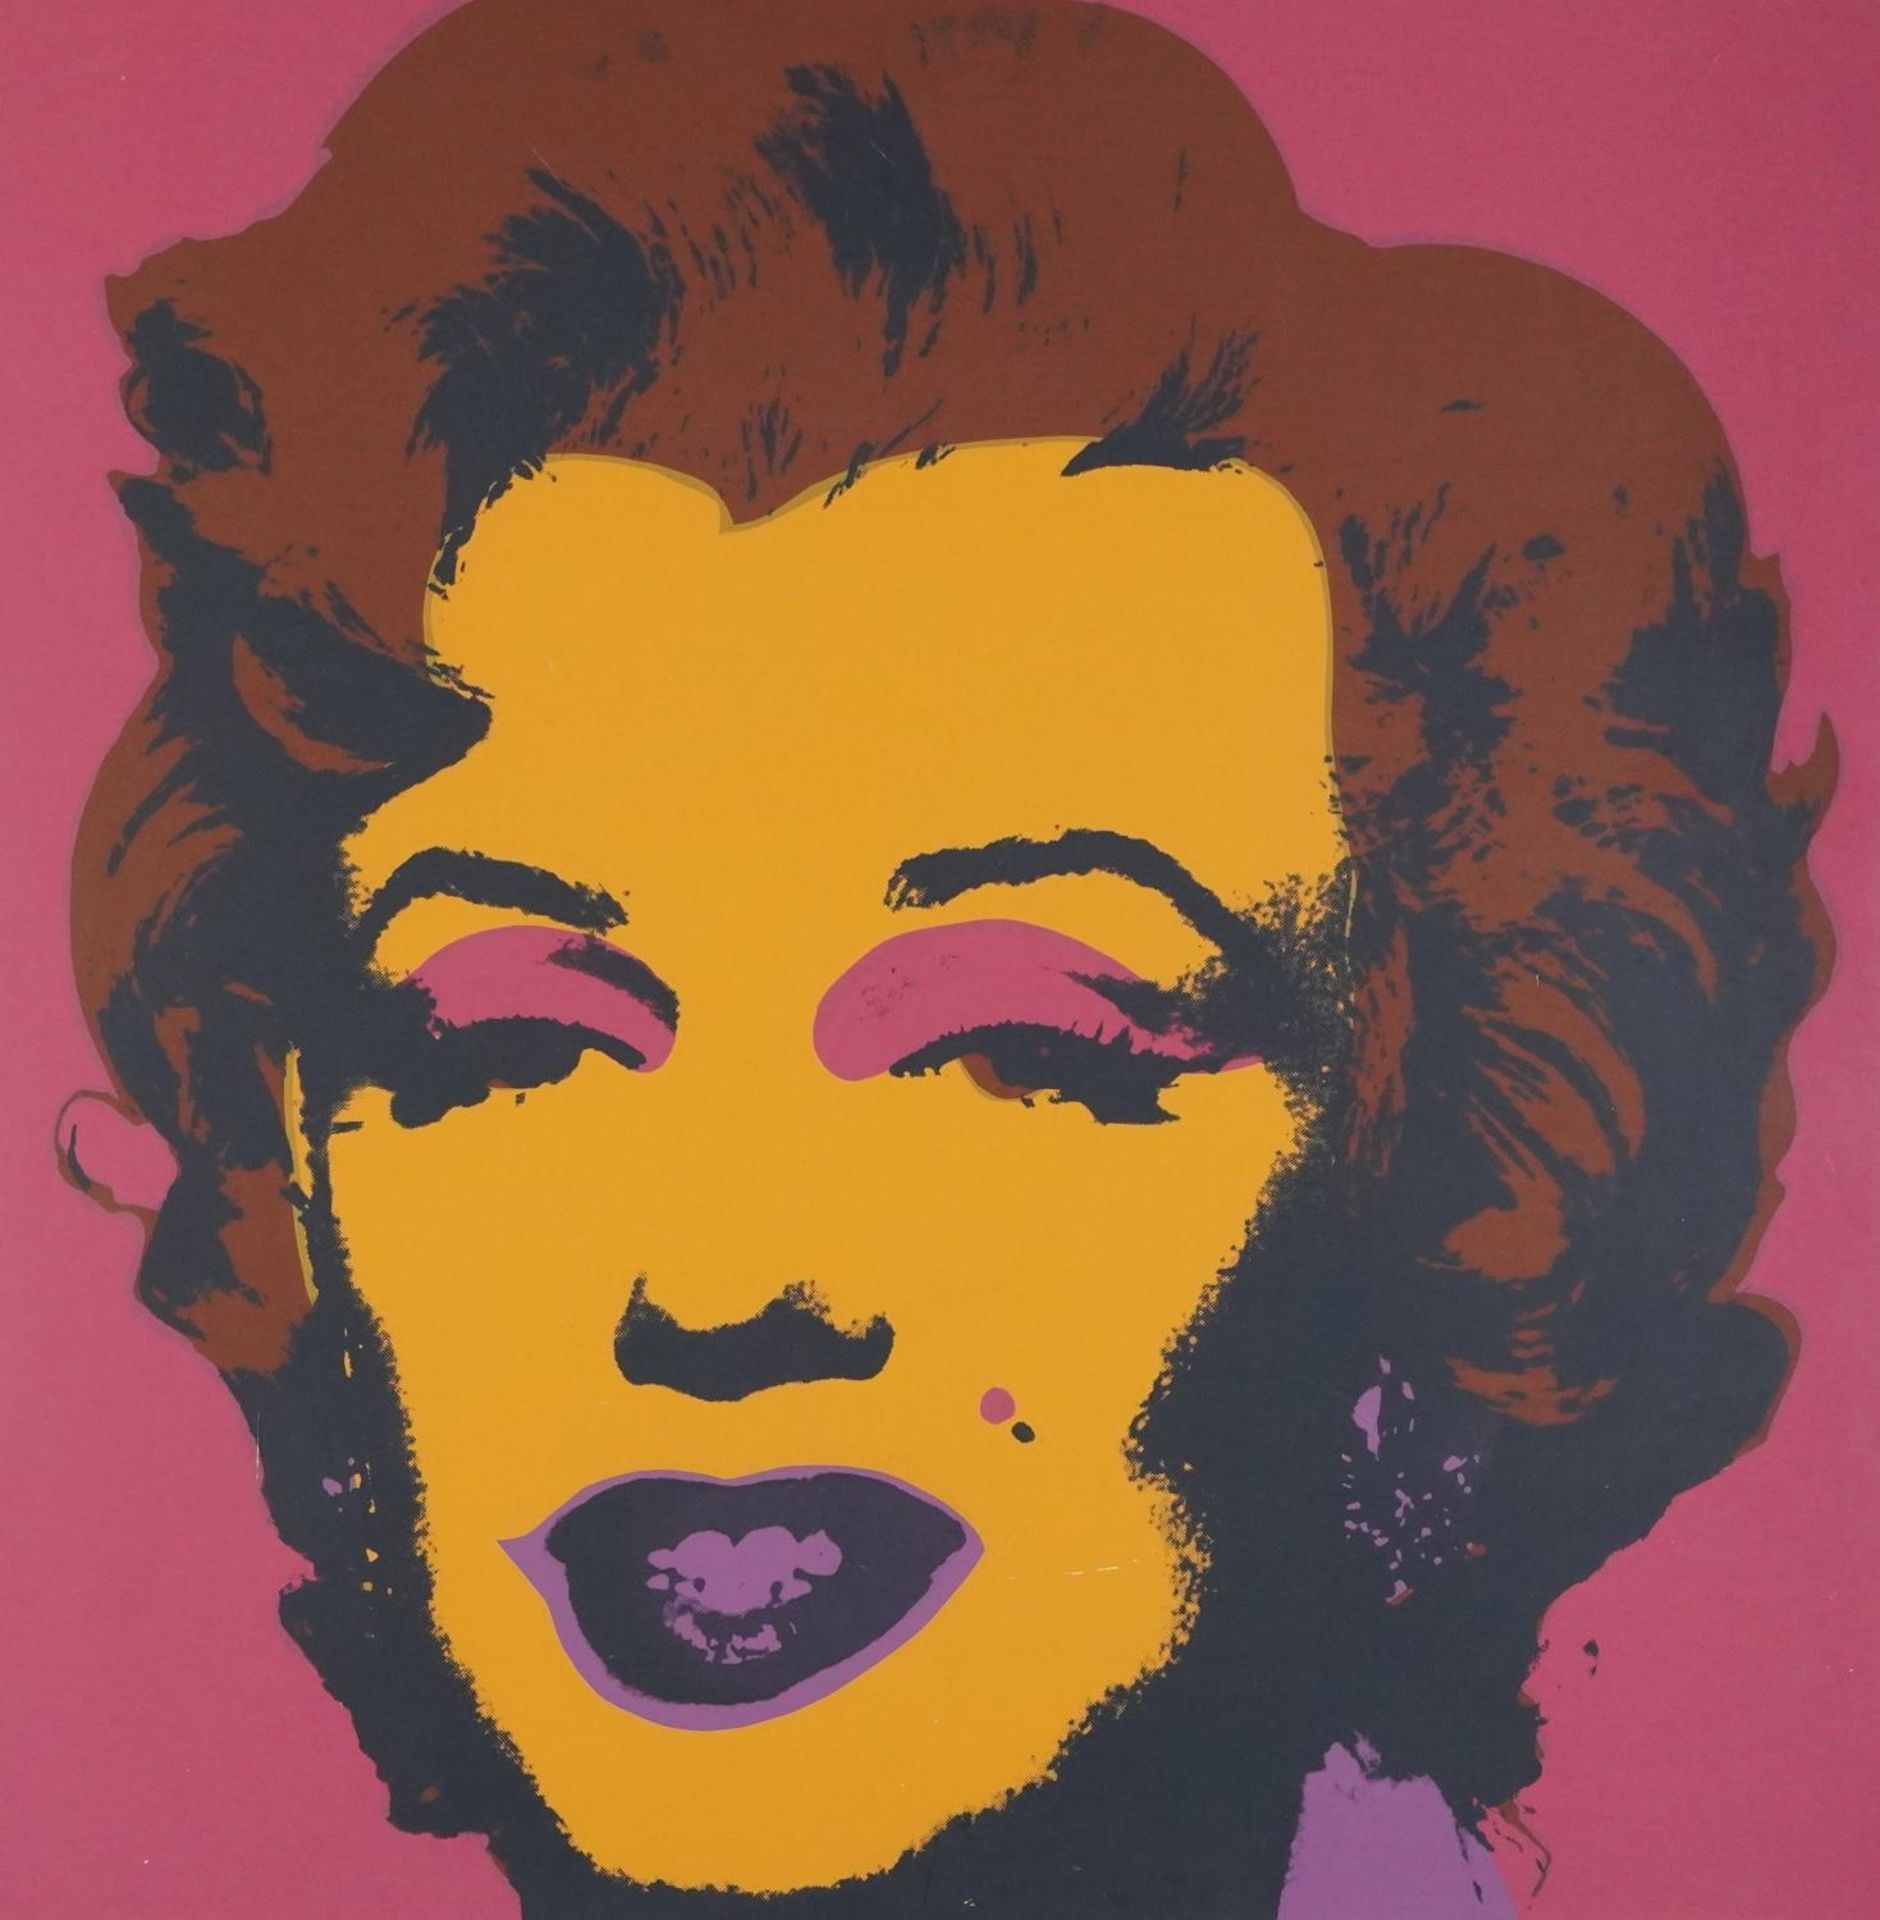 After Andy Warhol - Marilyn Monroe, Pop Art print in colour, framed and glazed, 89cm x 89cm